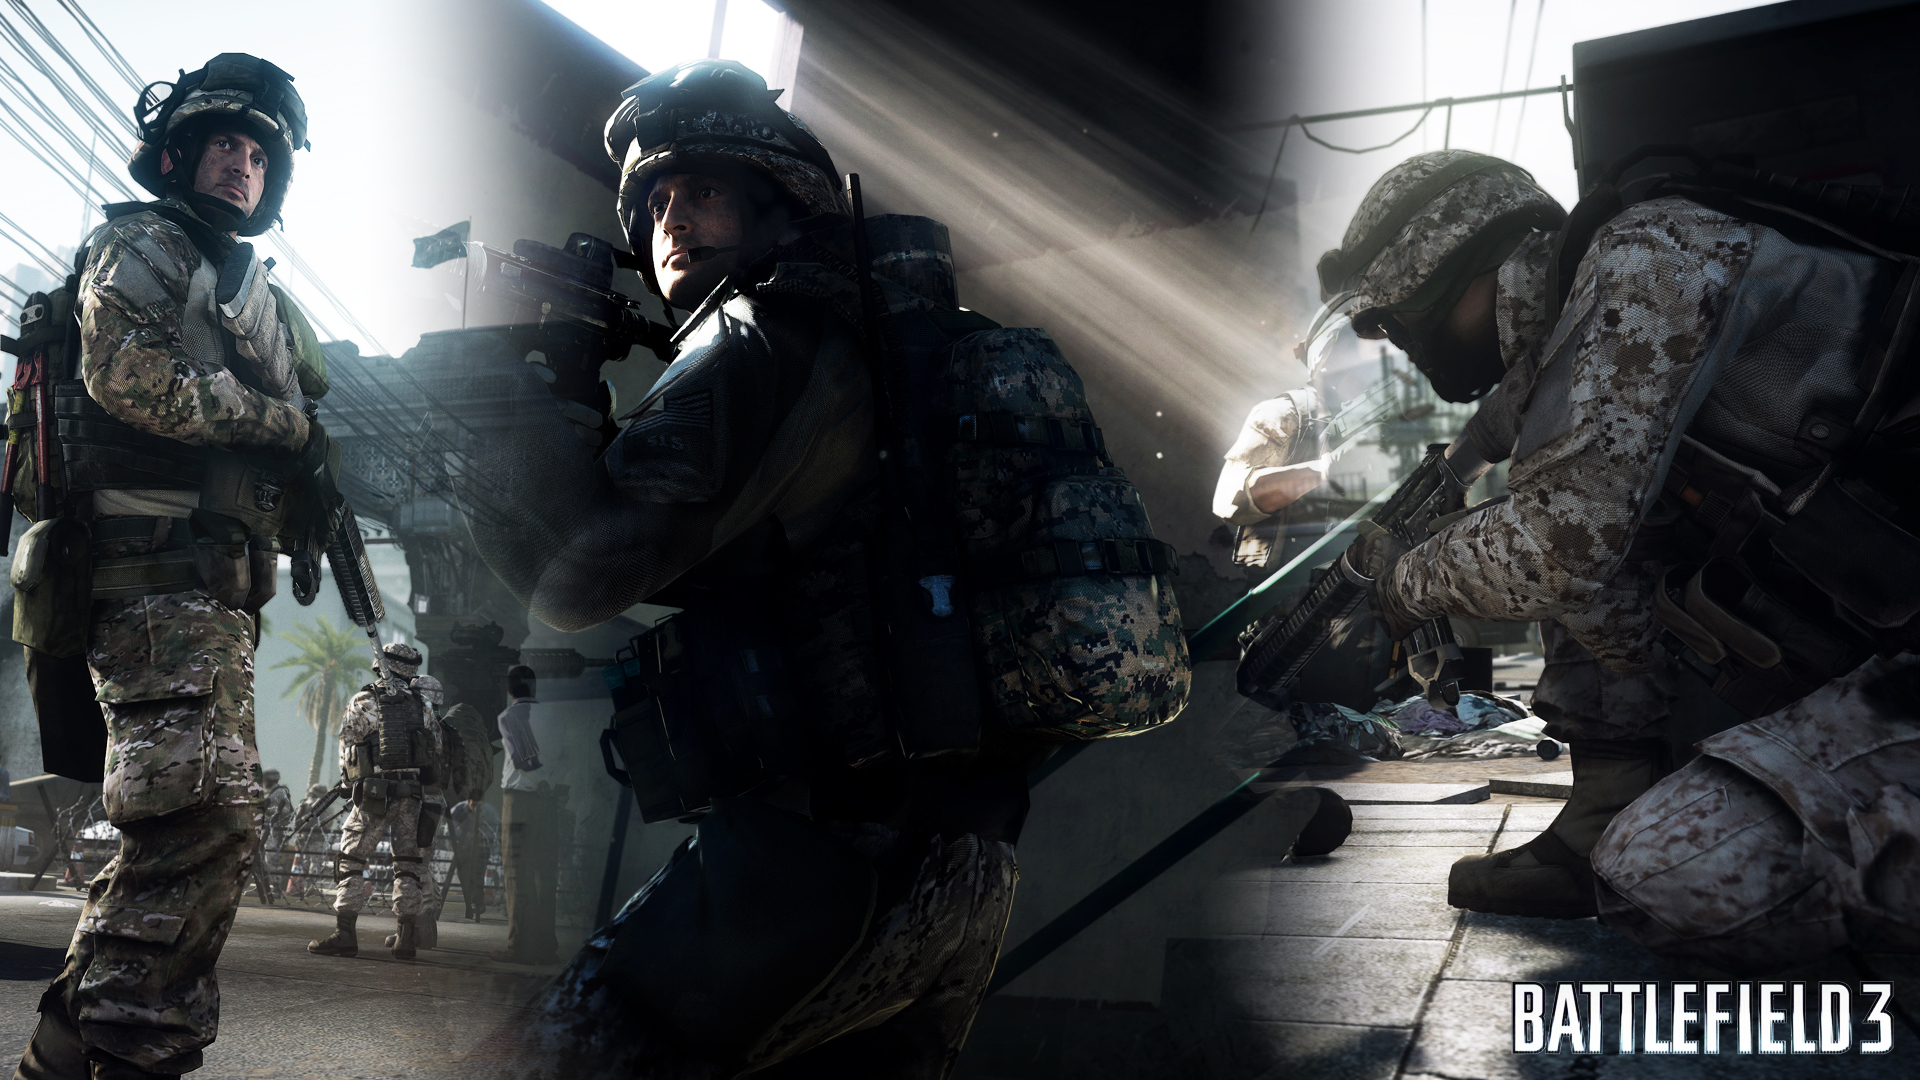 Battlefield 3 Wallpapers in HD High Resolution Page 4 1920x1080